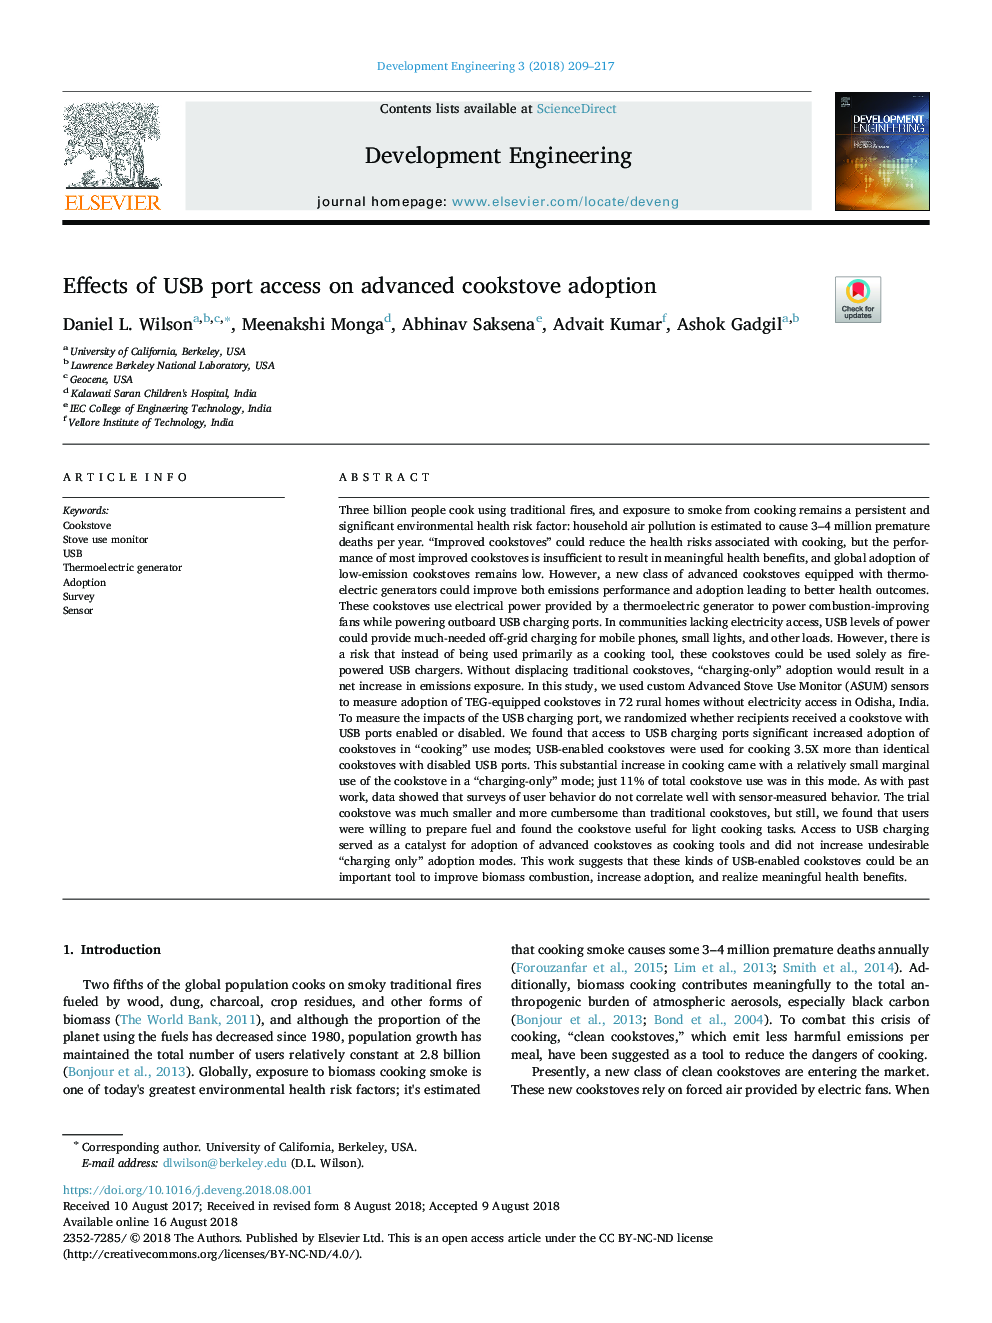 Effects of USB port access on advanced cookstove adoption